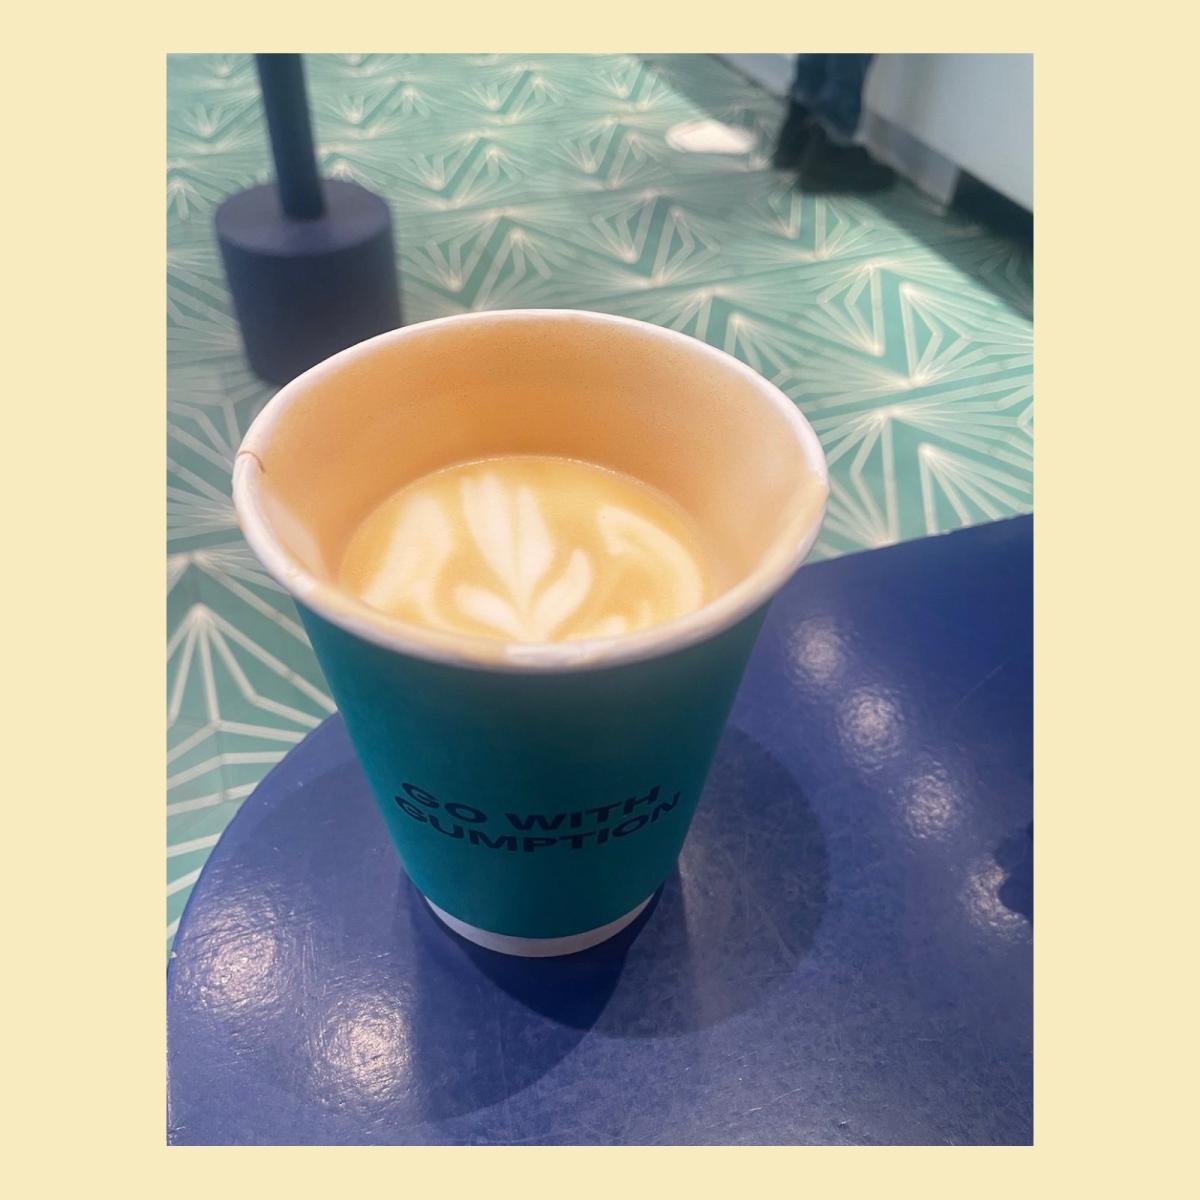 A half-drunk latte in a teal paper cup sits on a blue table